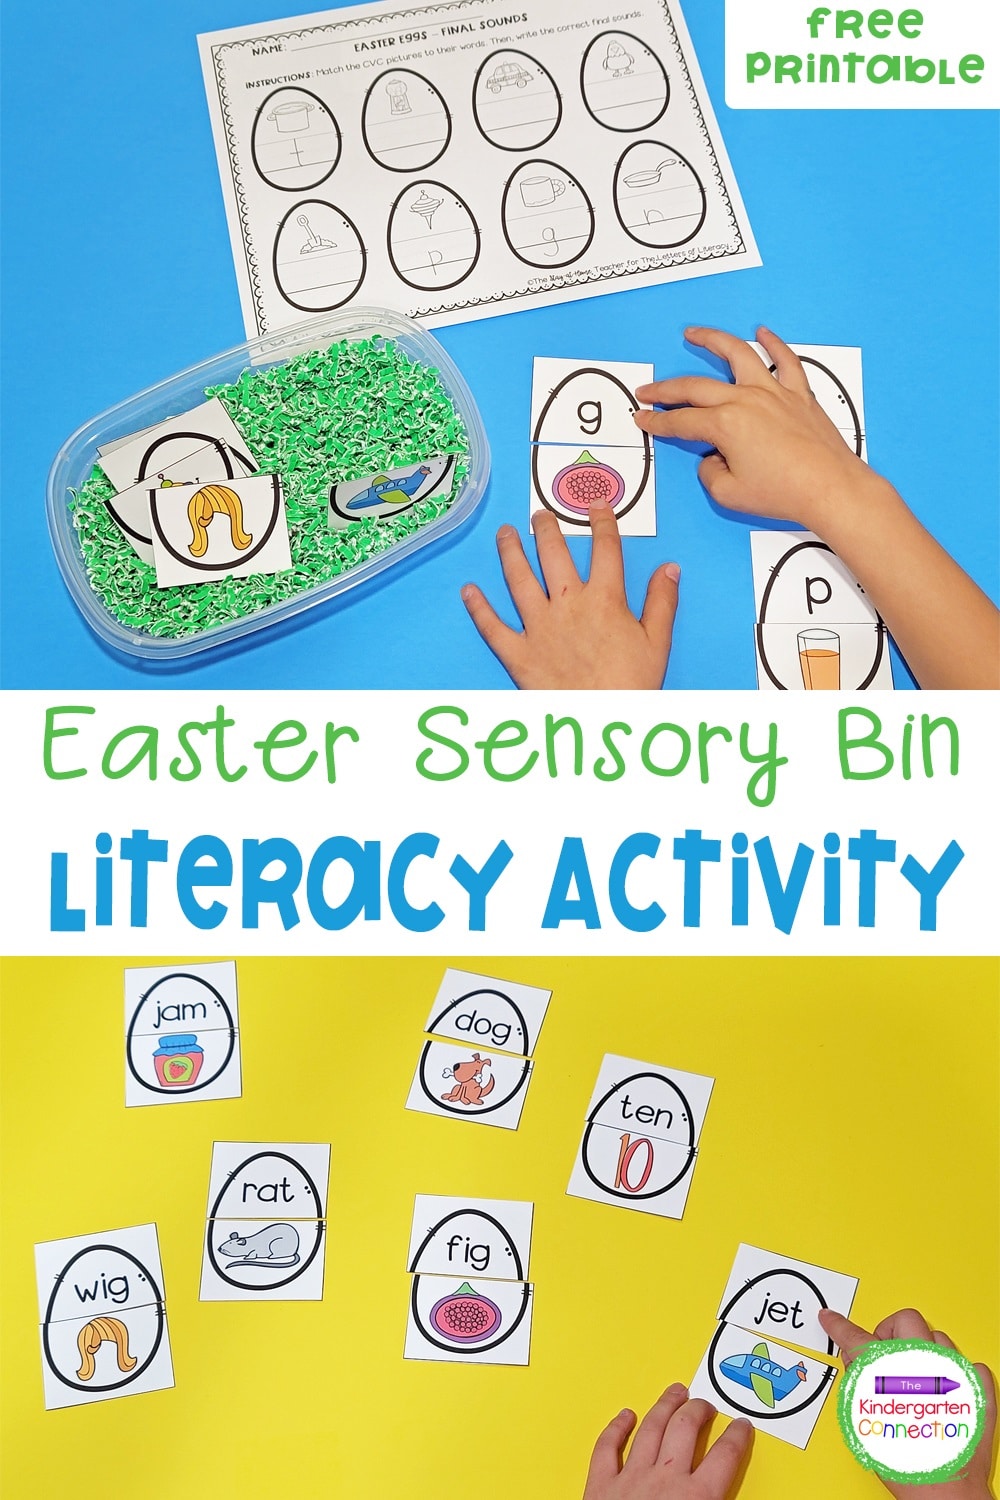 This free Easter Sensory Bin Literacy Activity is a great hands-on way to practice early literacy skills like CVC words and ending sounds!